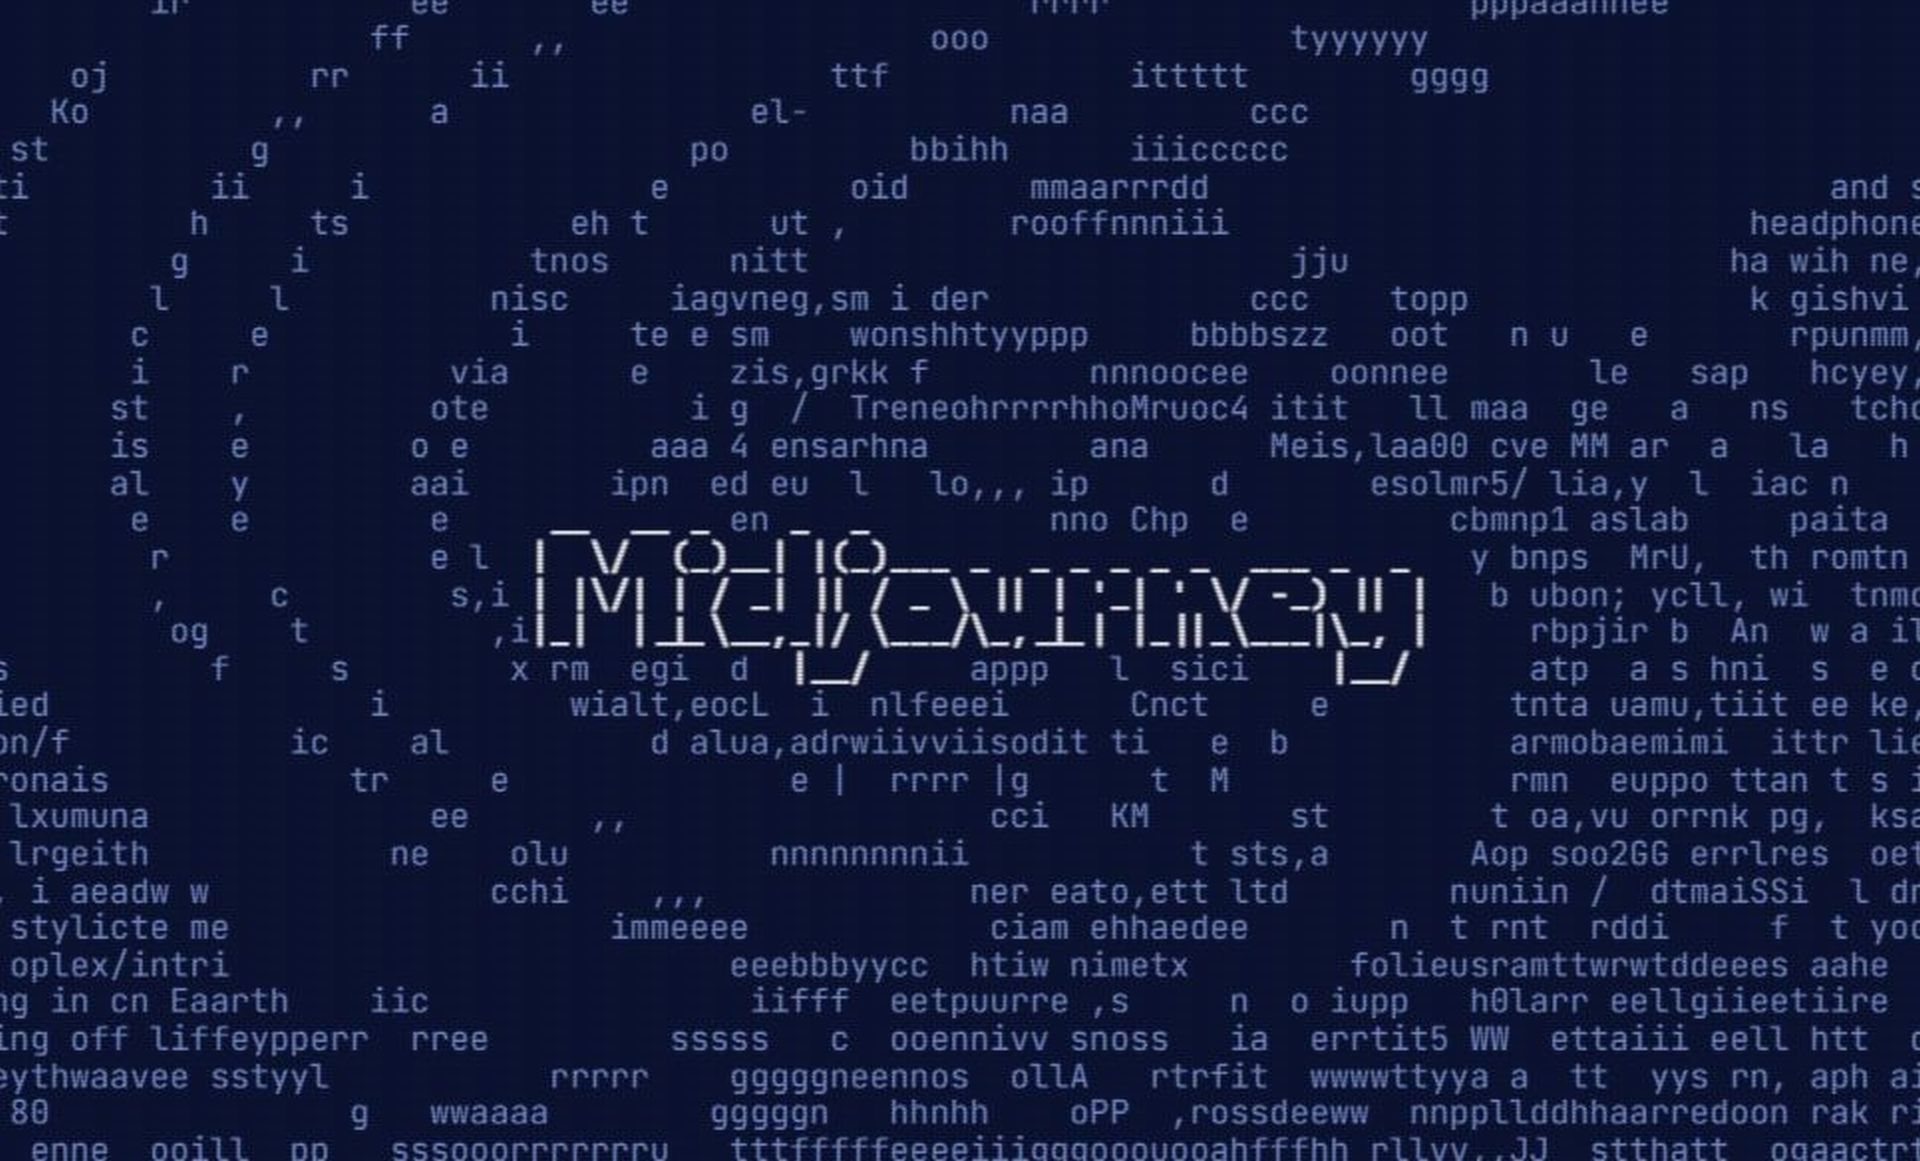 Midjourney banned words